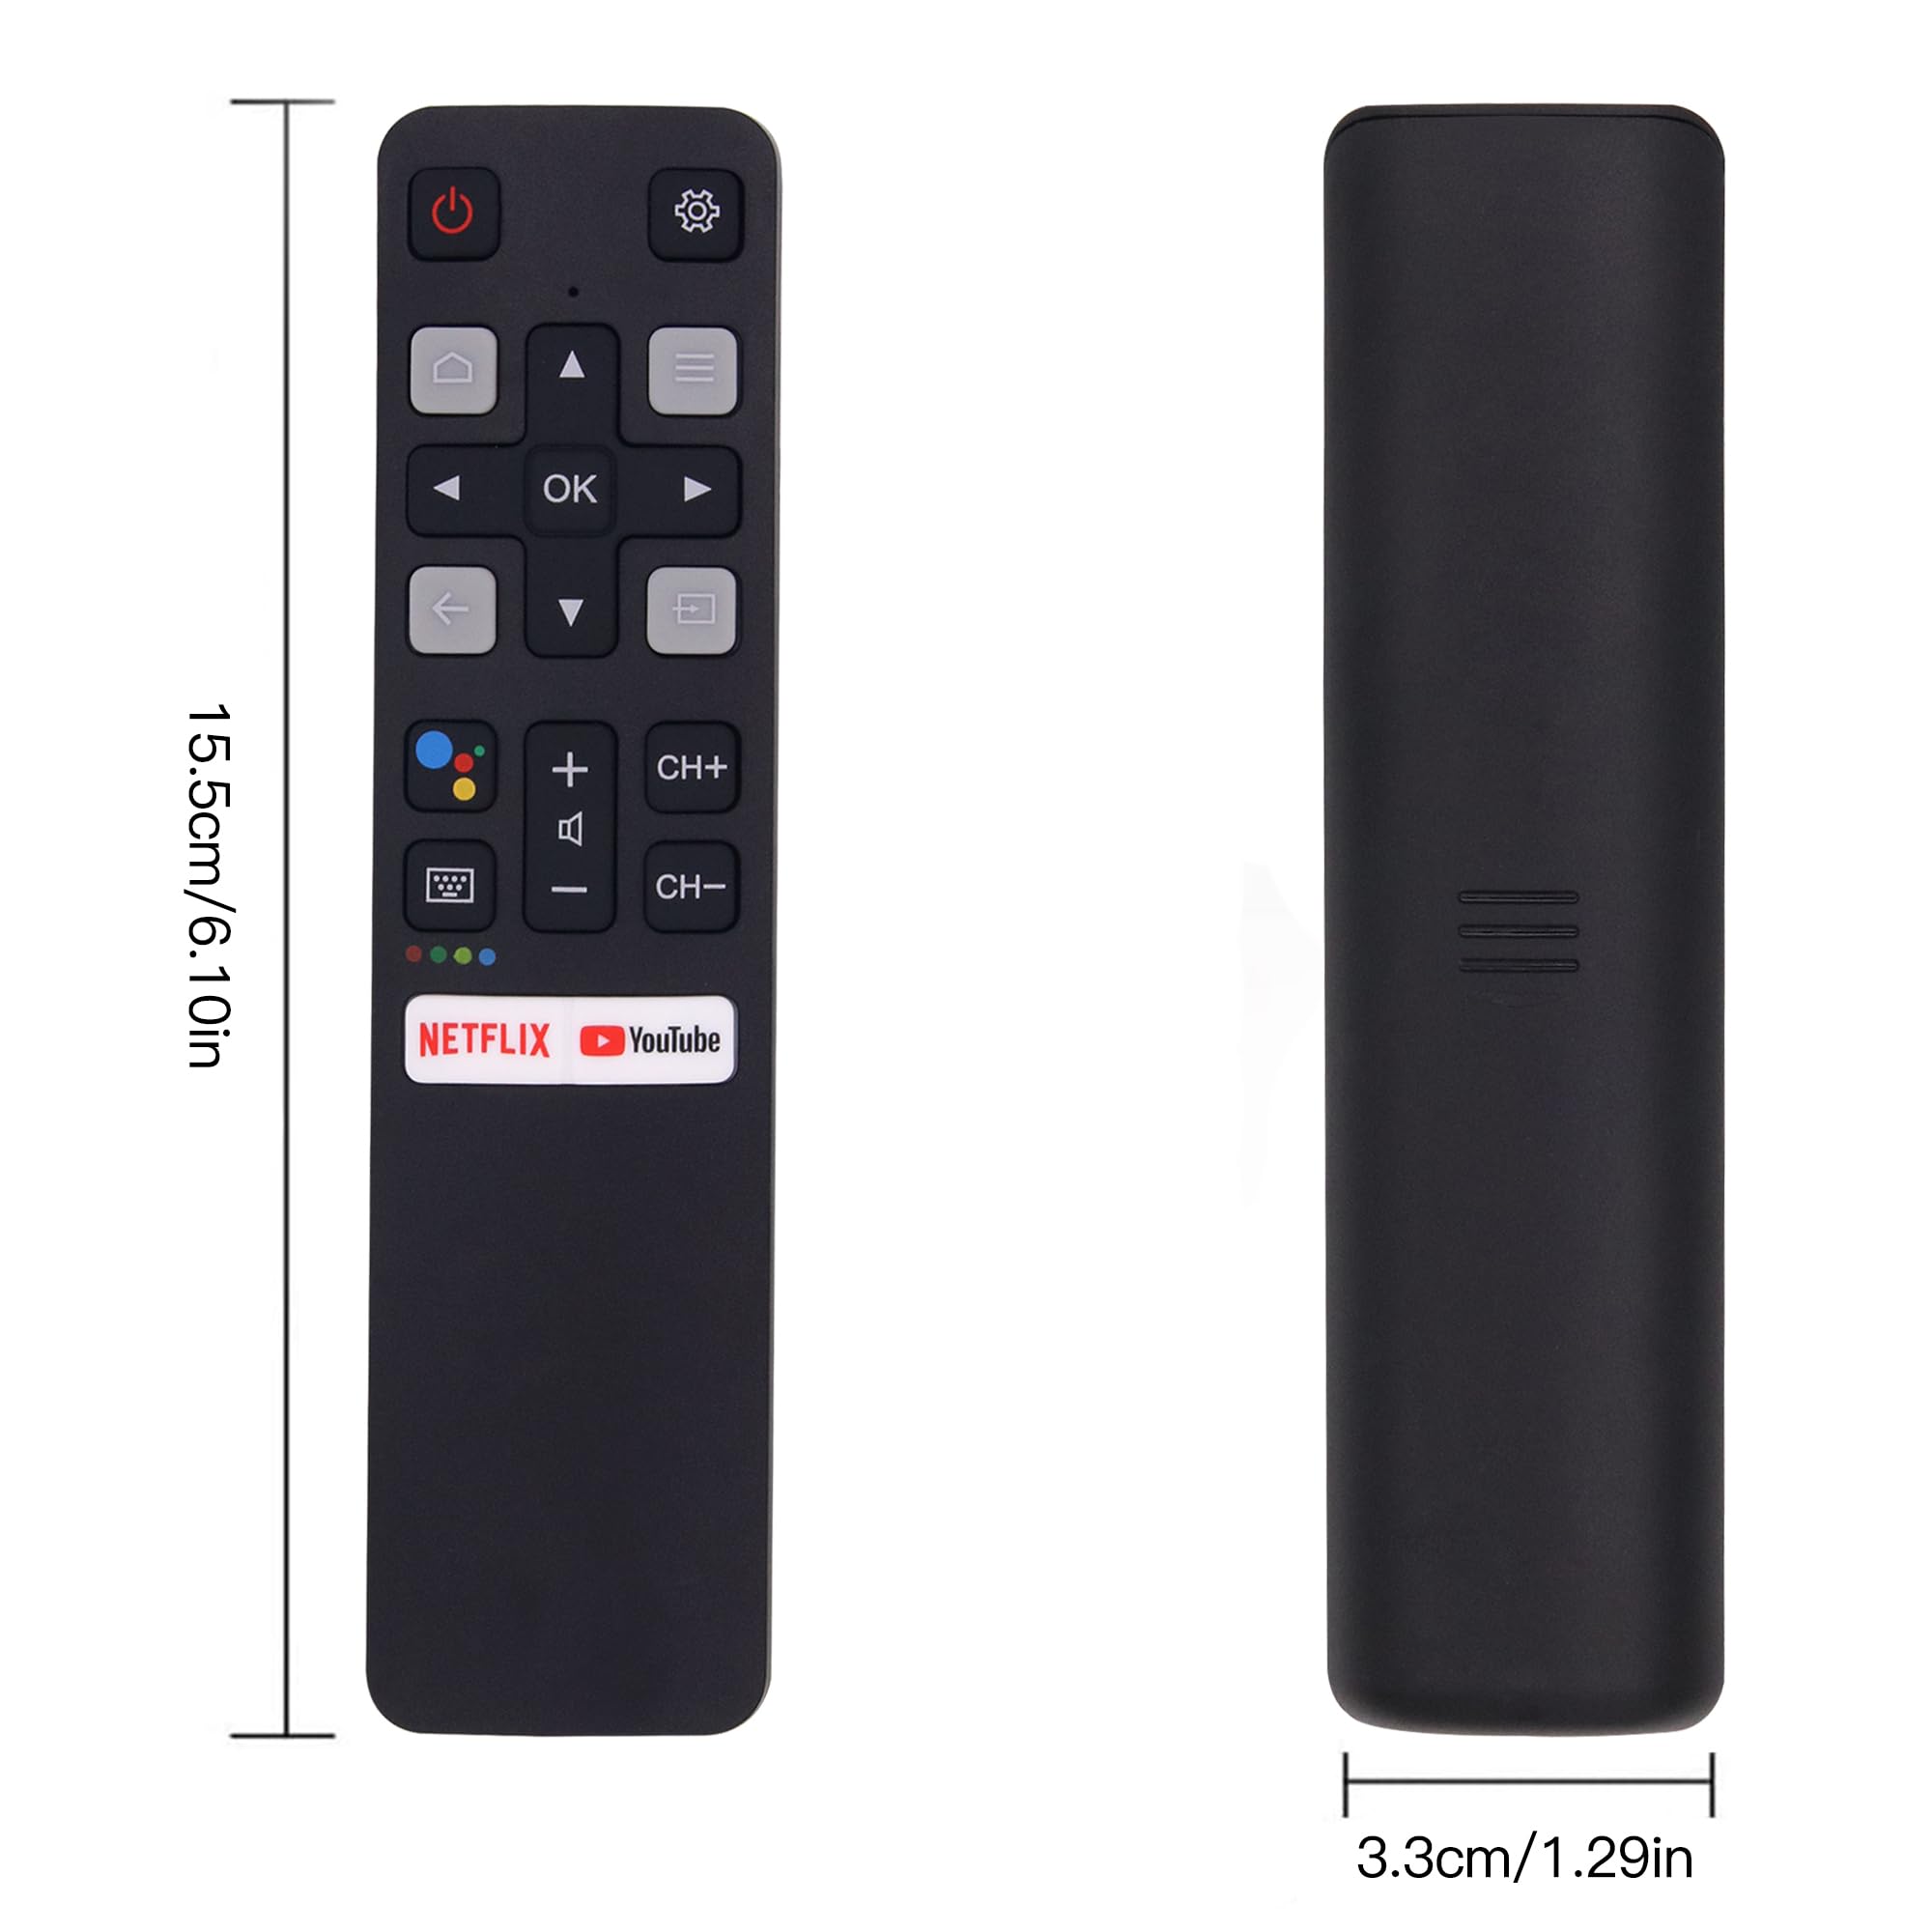 New Replacement TCL Remote Control (RC802V FNR1) for All TCL Android 4K UHD Smart TV Without Voice Function